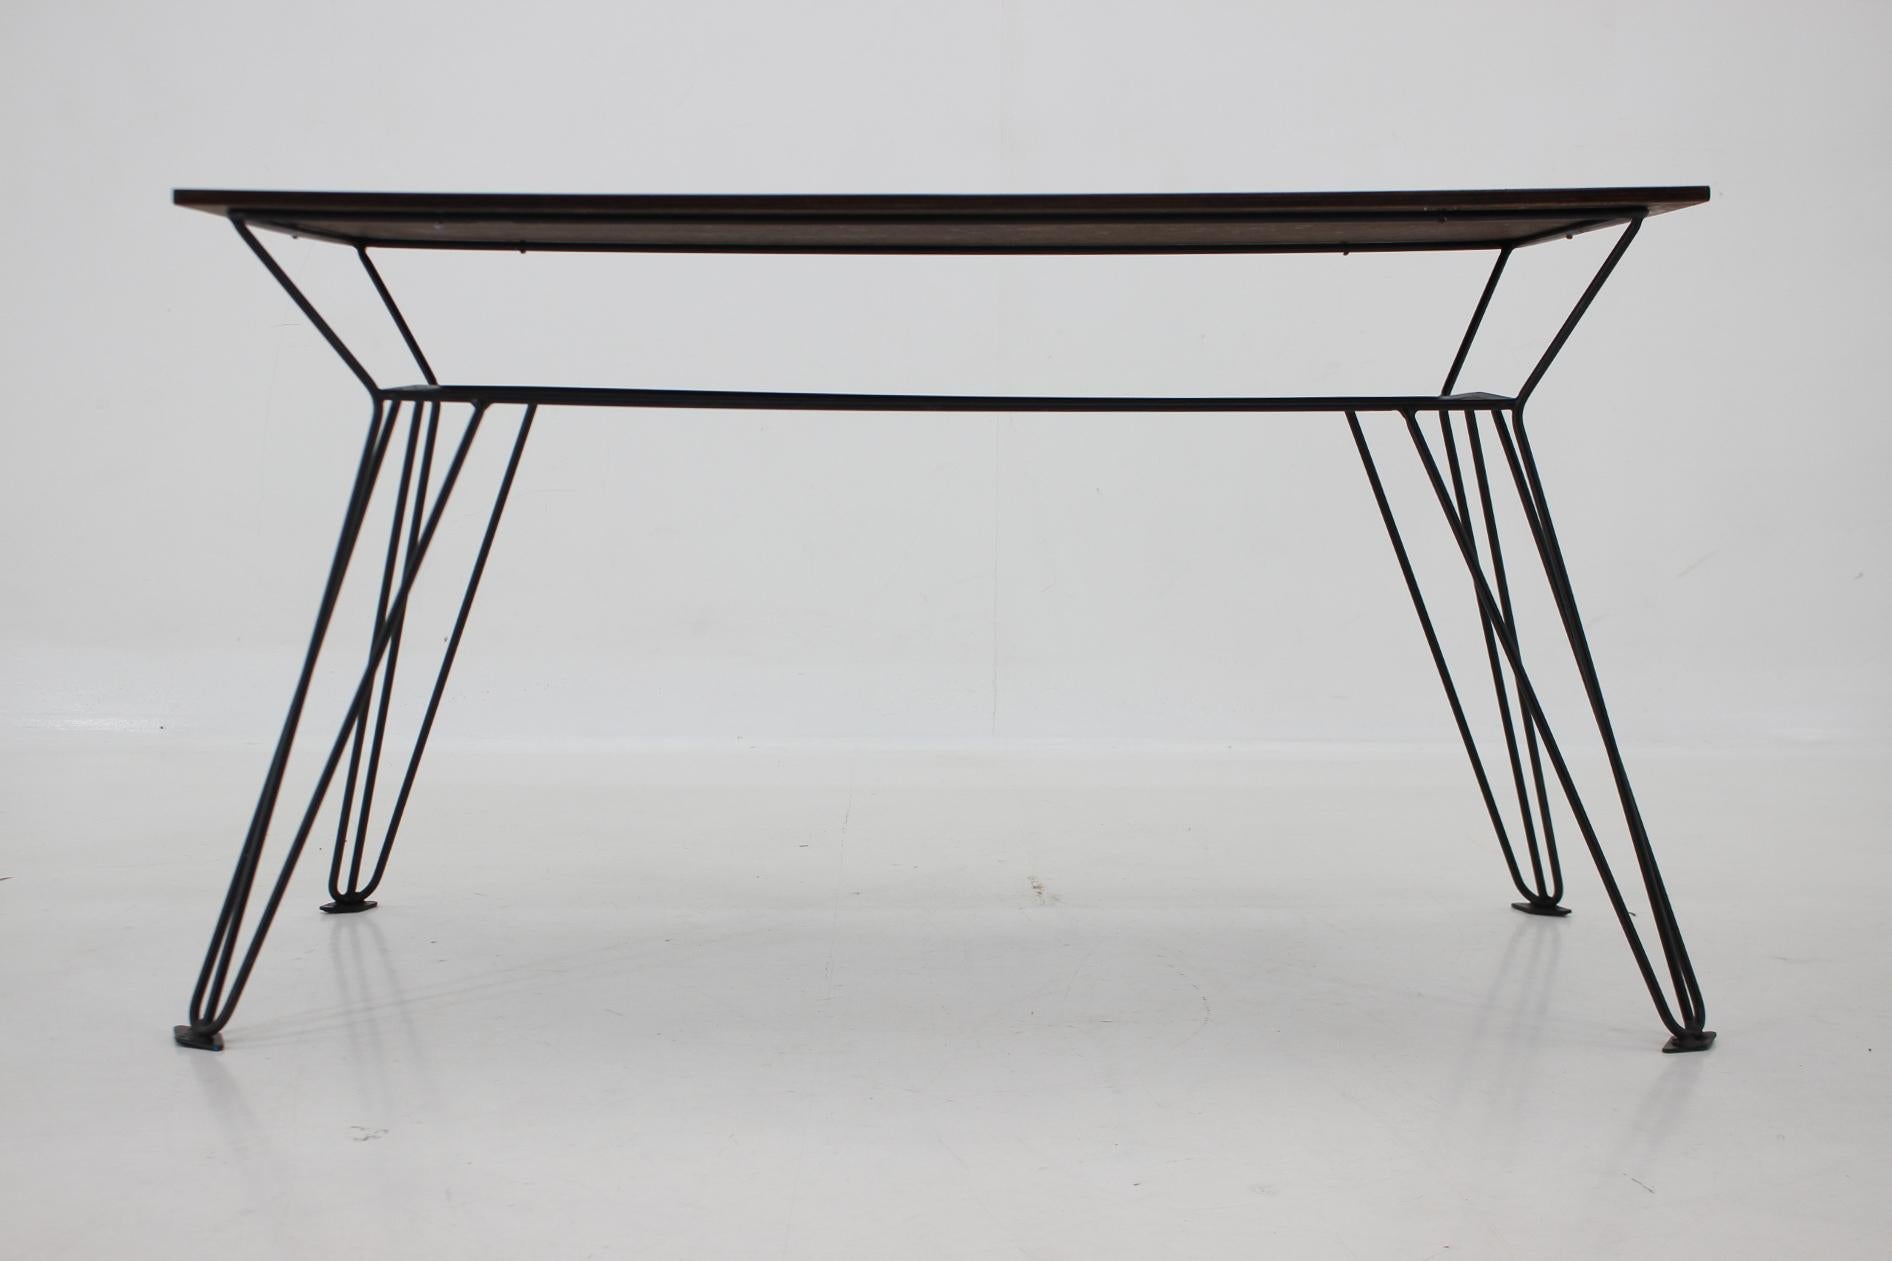 Vintage coffee or side table with wallnut veneer top and metal legs, produced in former Czechoslovakia in the 1970's.